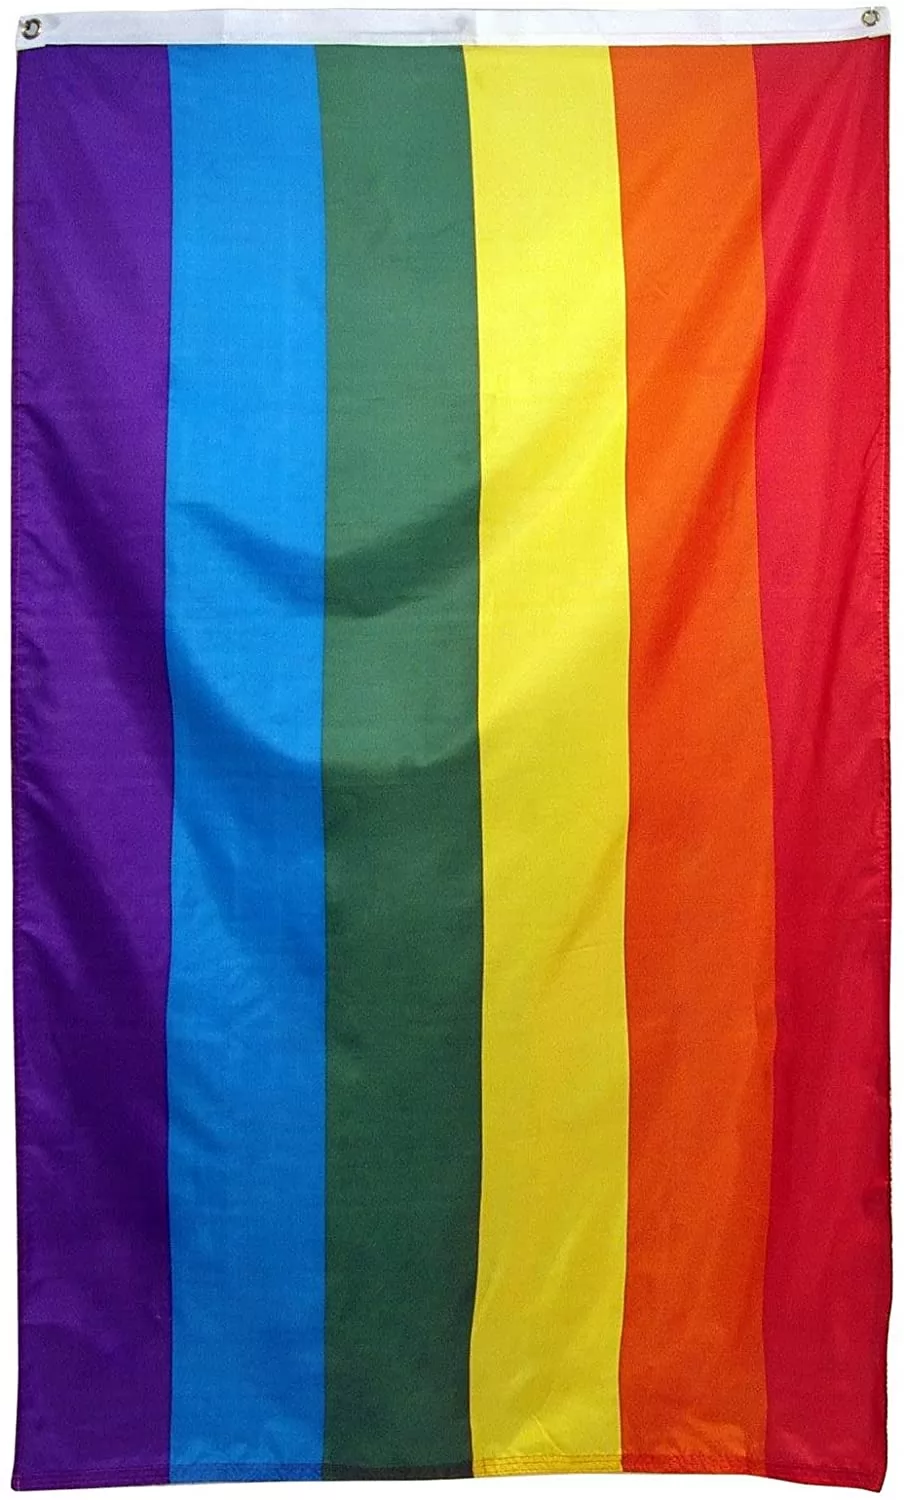 Homissor Rainbow Gay Pride Flag 3x5 ft- LGBTQ Pride Parade Banner Flags UV Fade Resistant for Indoor Outdoor